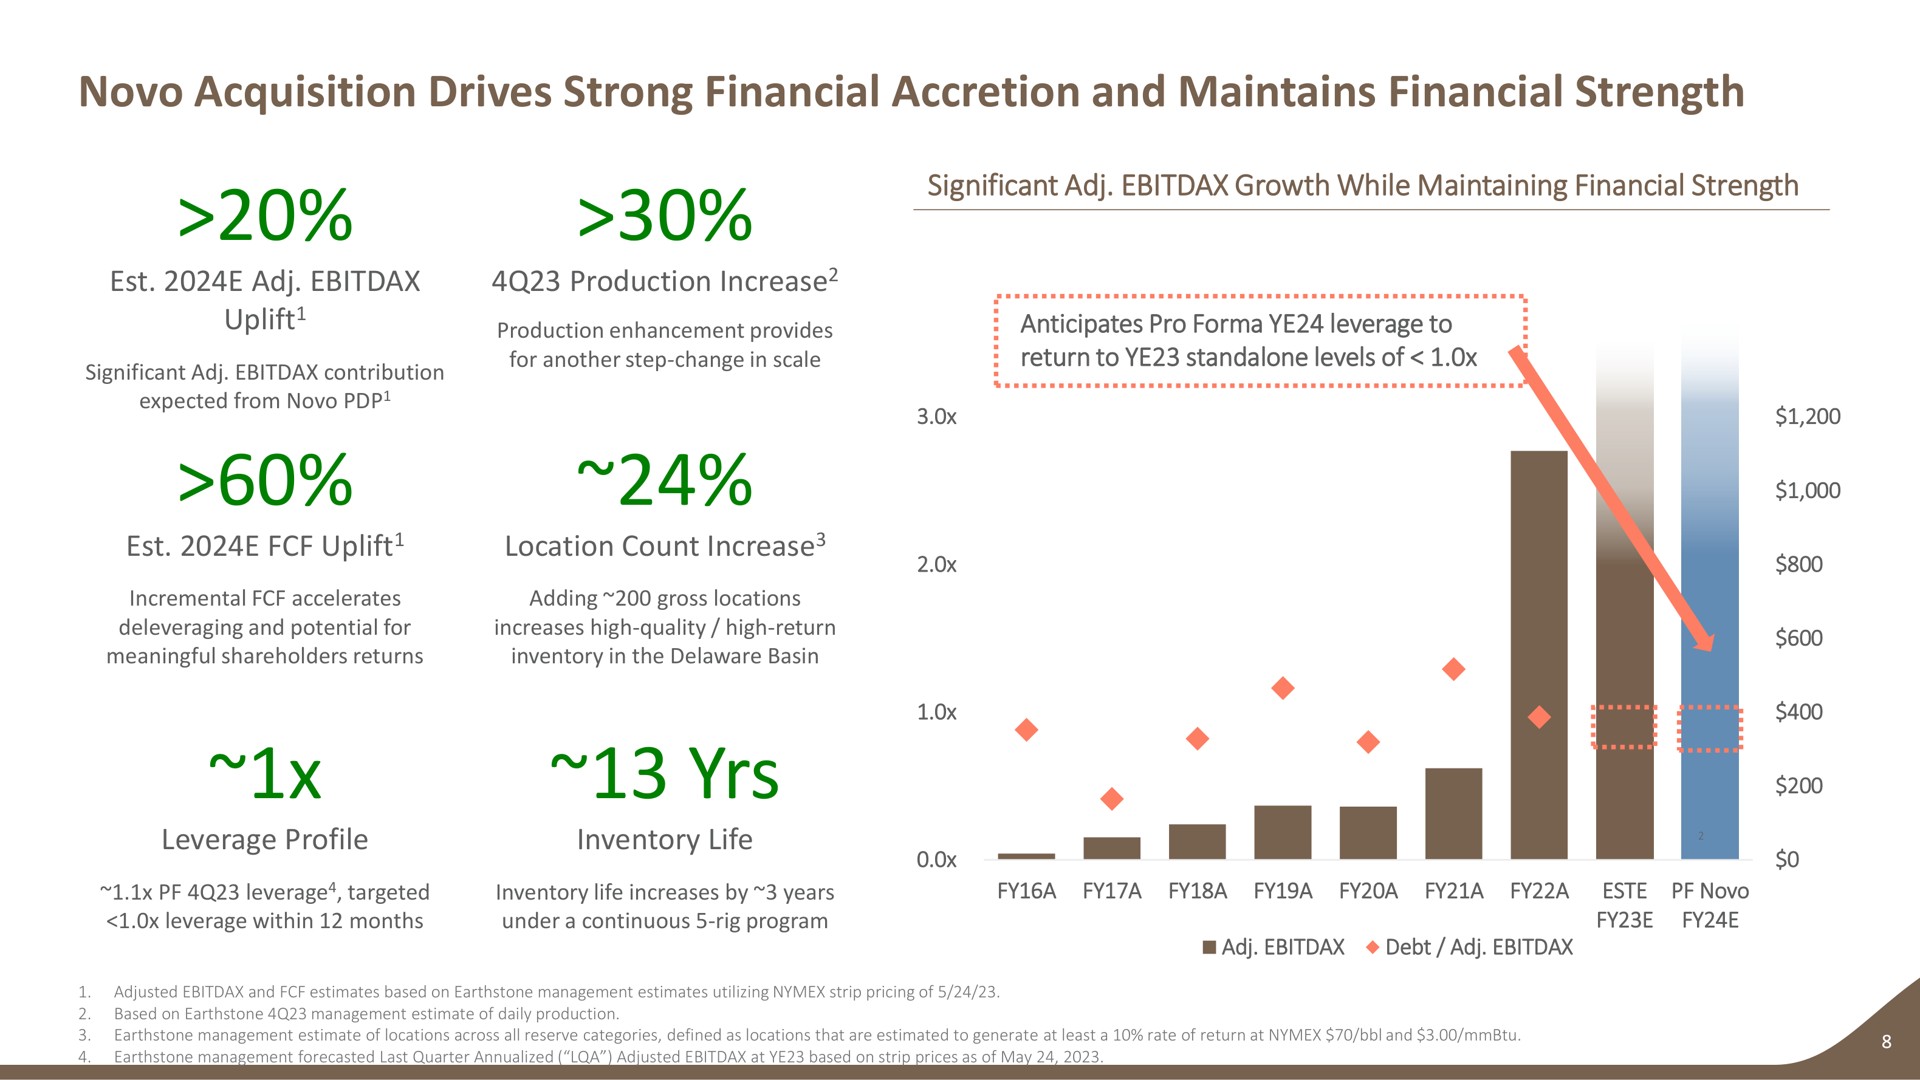 acquisition drives strong financial accretion and maintains financial strength uplift production increase uplift location count increase leverage profile yrs inventory life significant growth while maintaining financial strength anticipates pro leverage to return to levels of uplift expected from increase uplift increase targeted a a a a a a a | Earthstone Energy